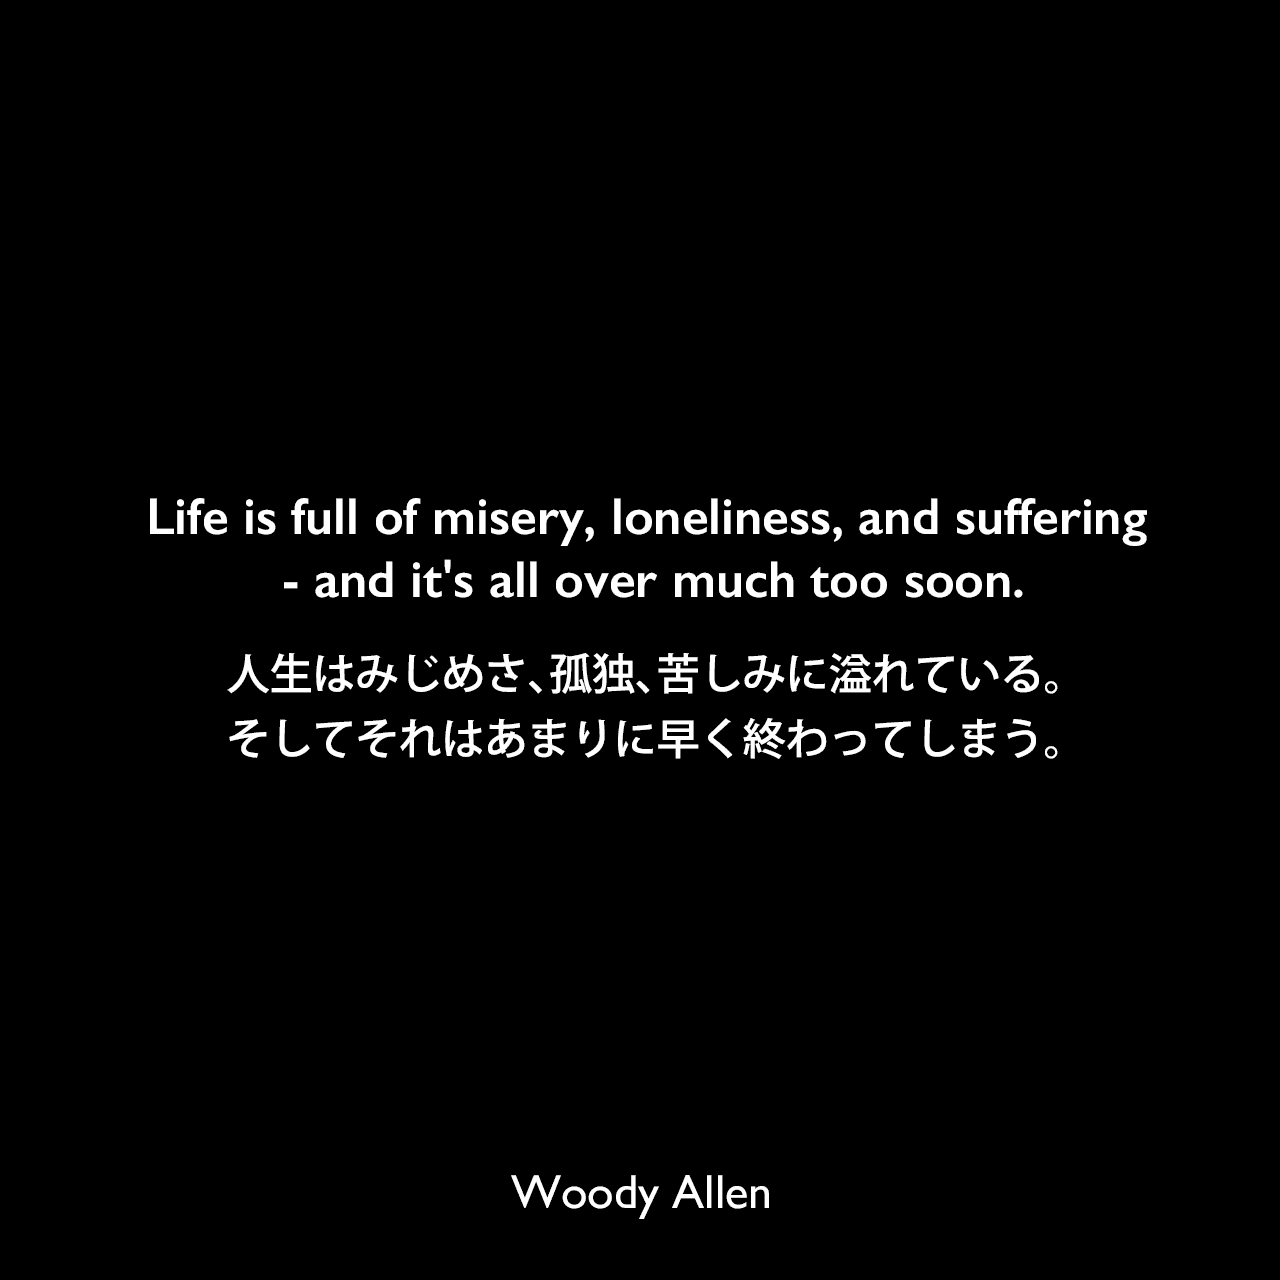 Life is full of misery, loneliness, and suffering - and it's all over much too soon.人生はみじめさ、孤独、苦しみに溢れている。そしてそれはあまりに早く終わってしまう。Woody Allen